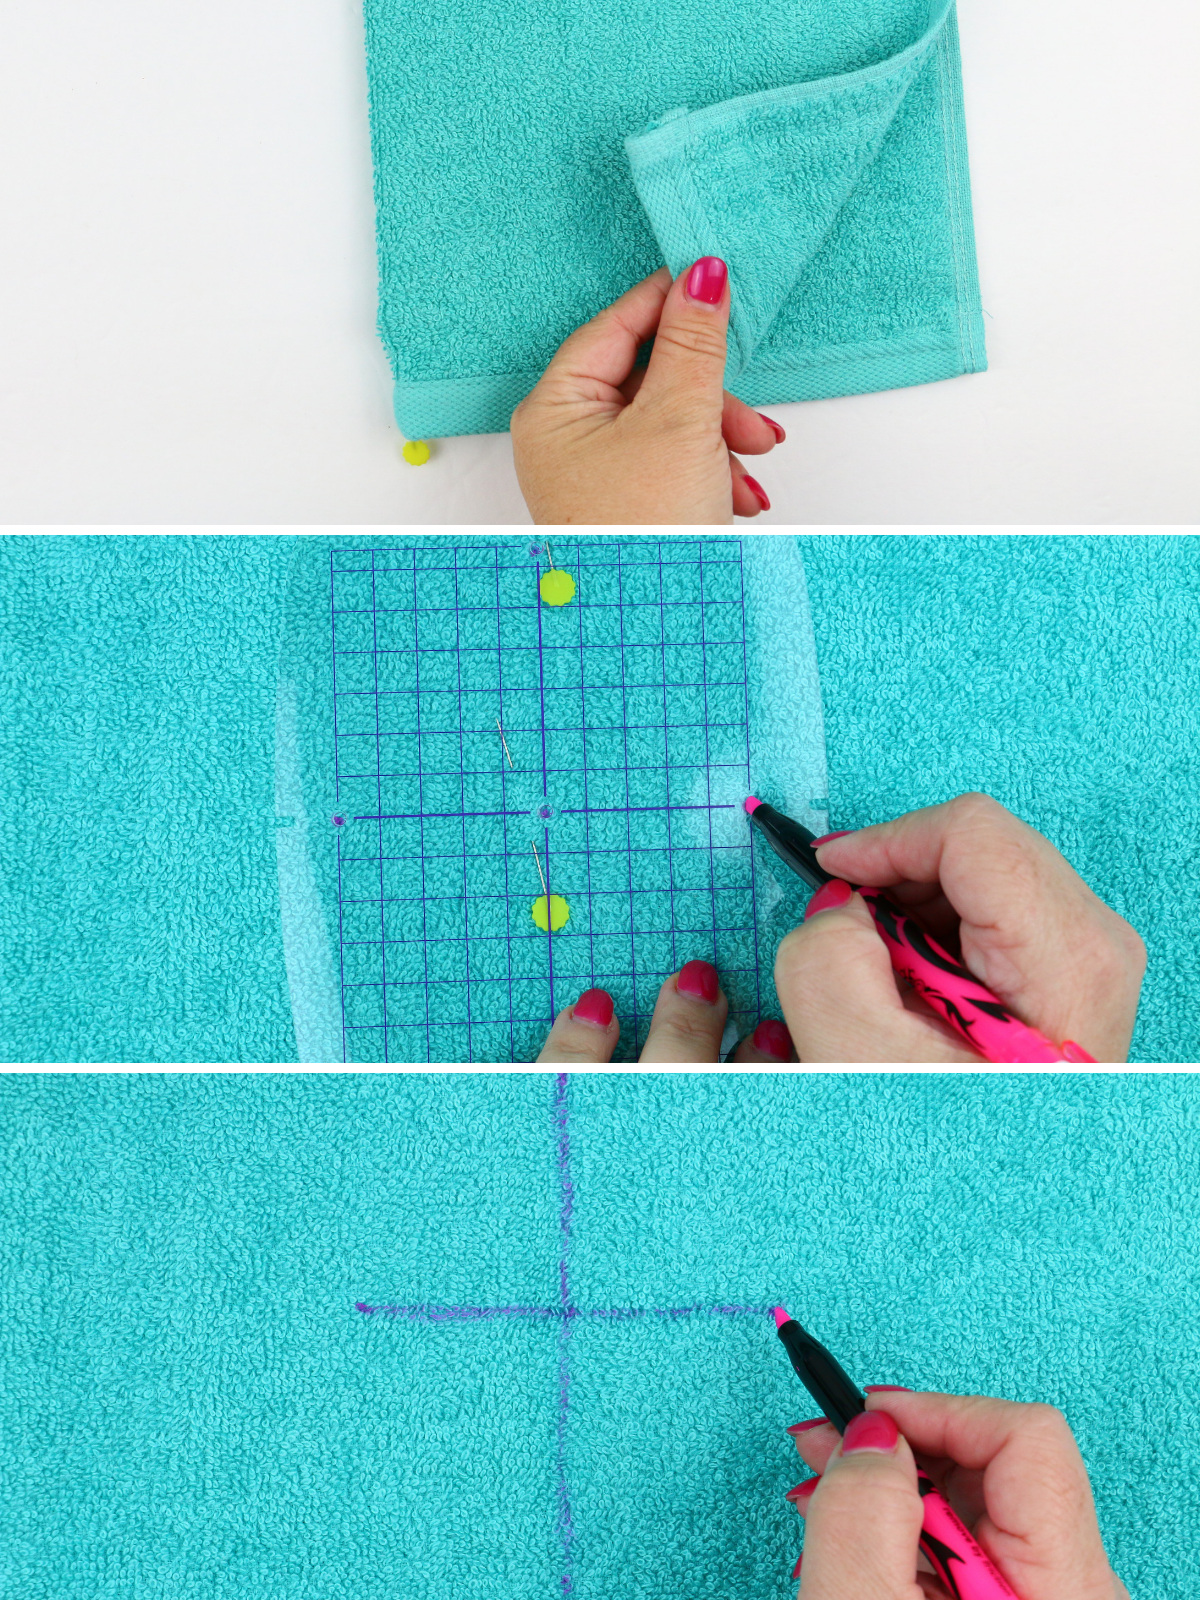 Beginner's Guide to Embroidery Stabilizers 